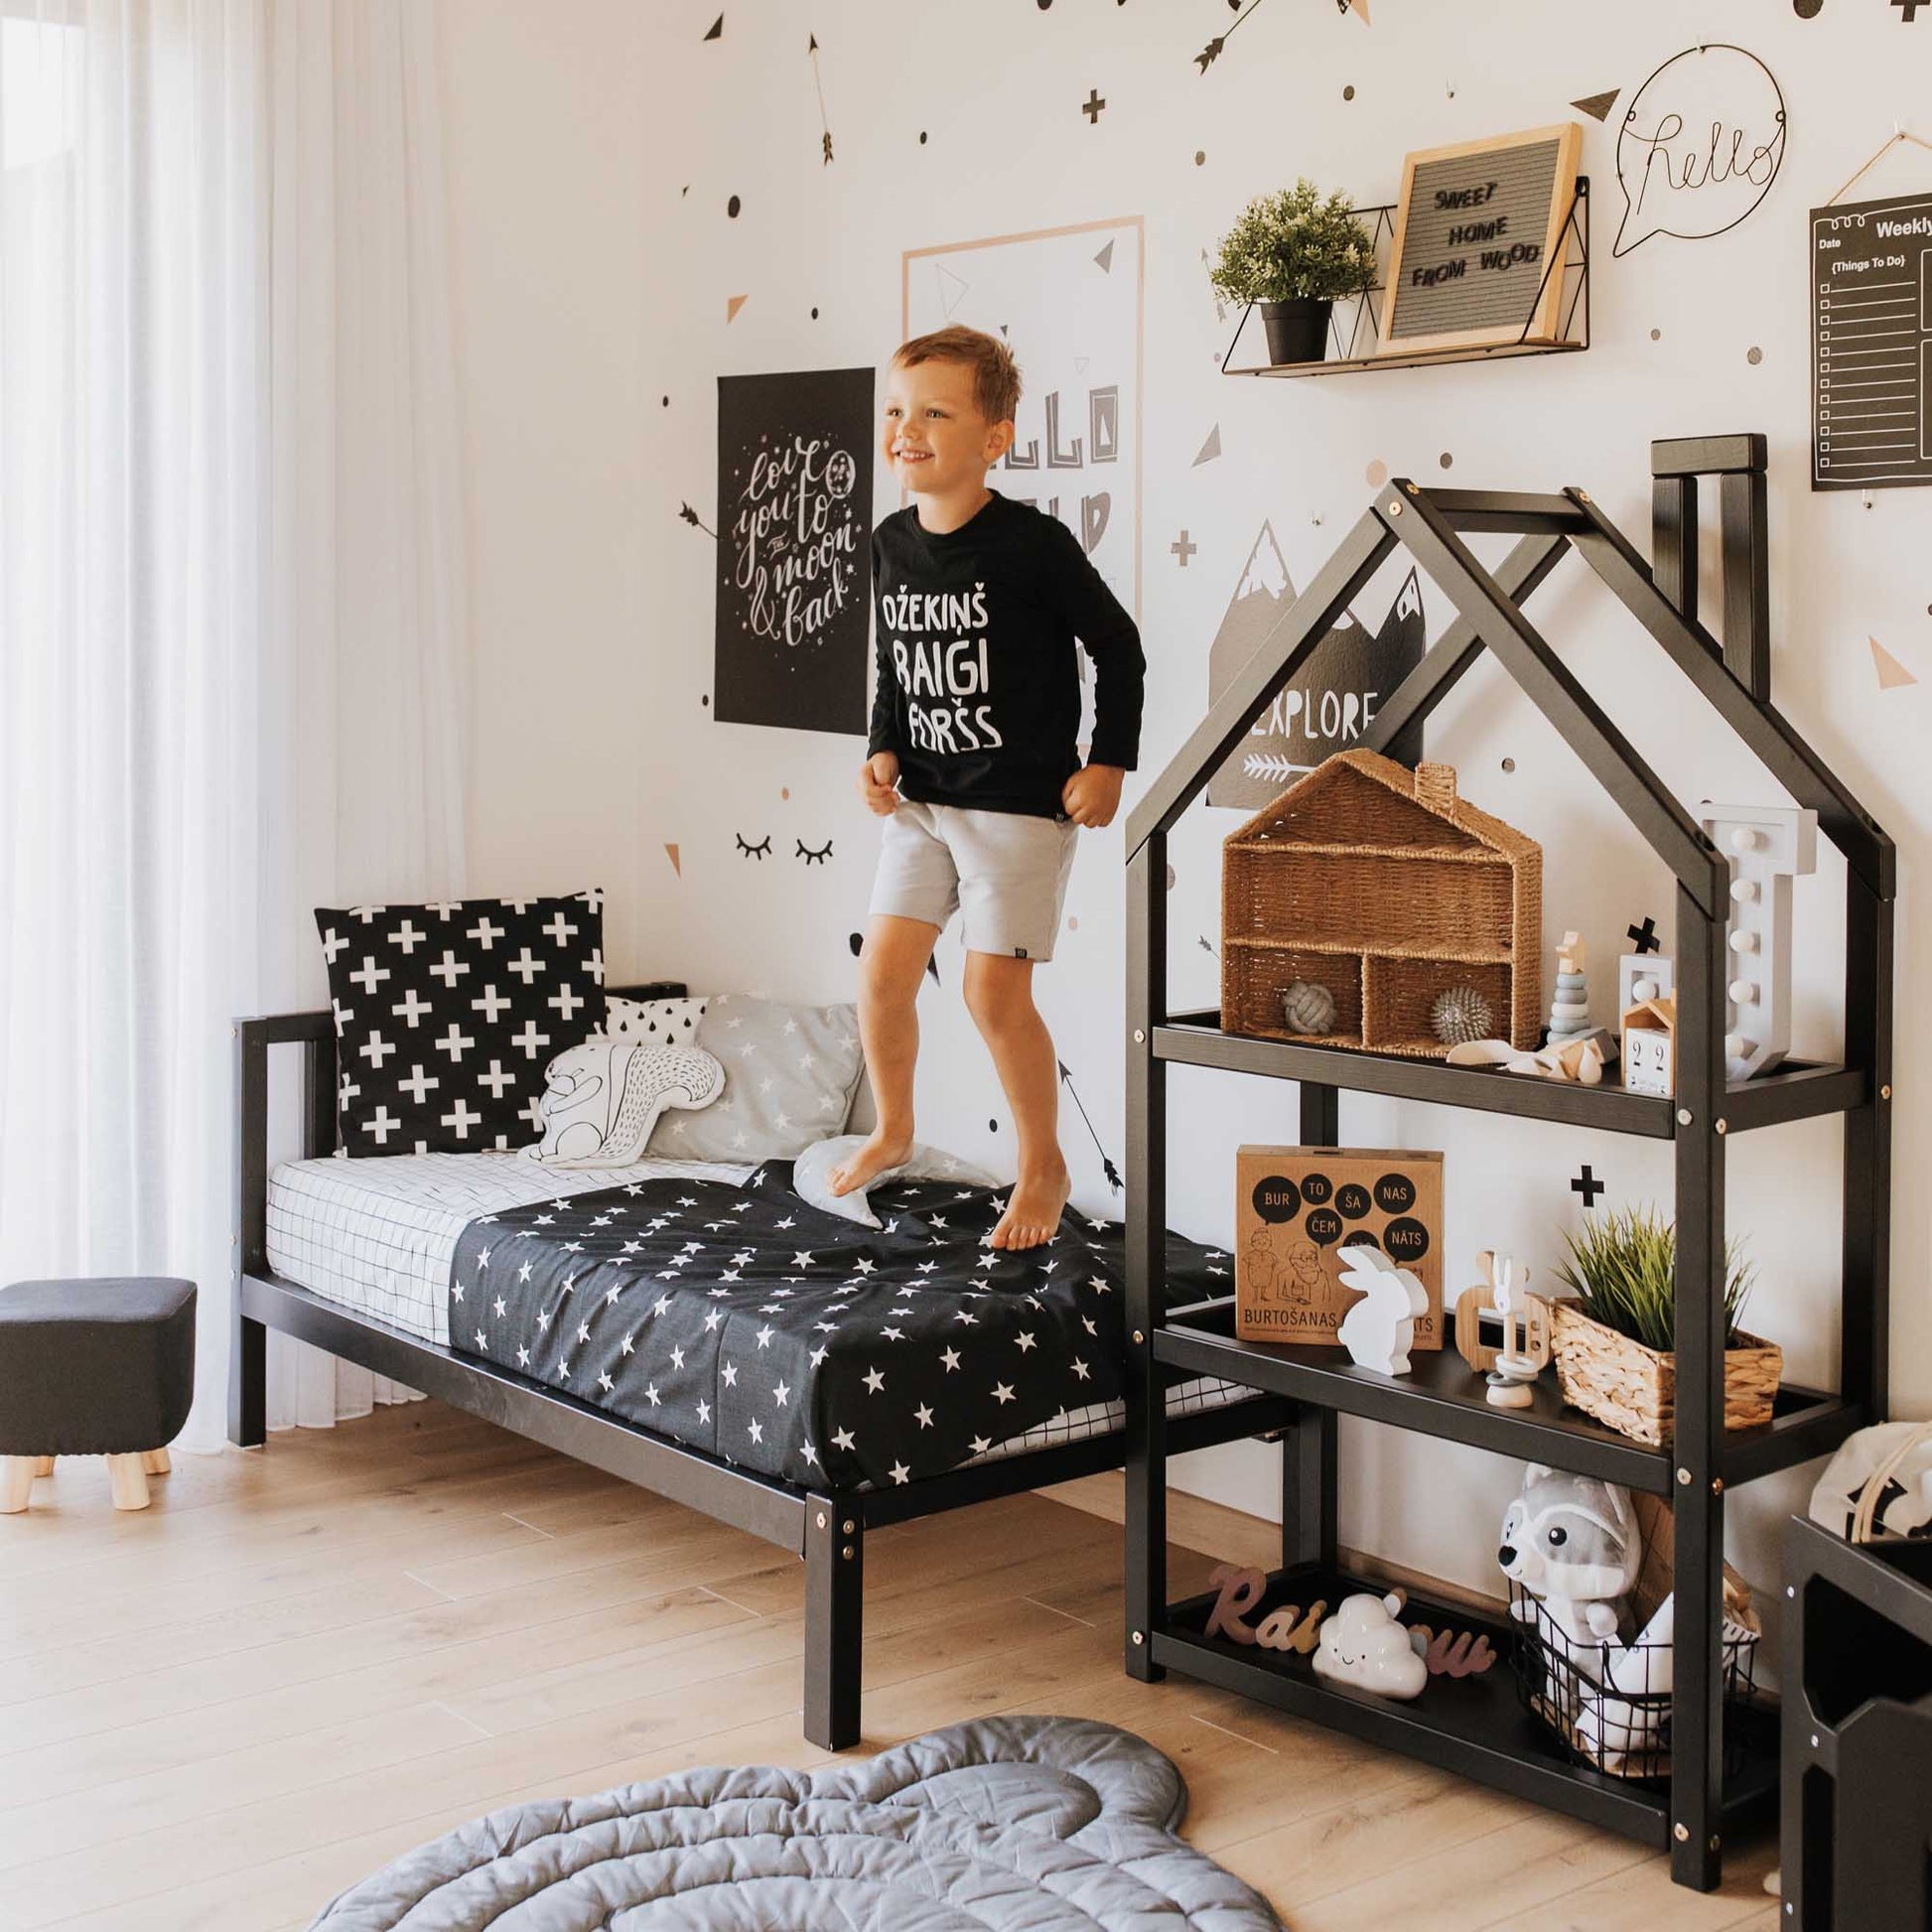 A Sweet Home From Wood 2-in-1 toddler bed on legs with a vertical rail headboard in a Montessori-inspired boy's bedroom with black and white decor.